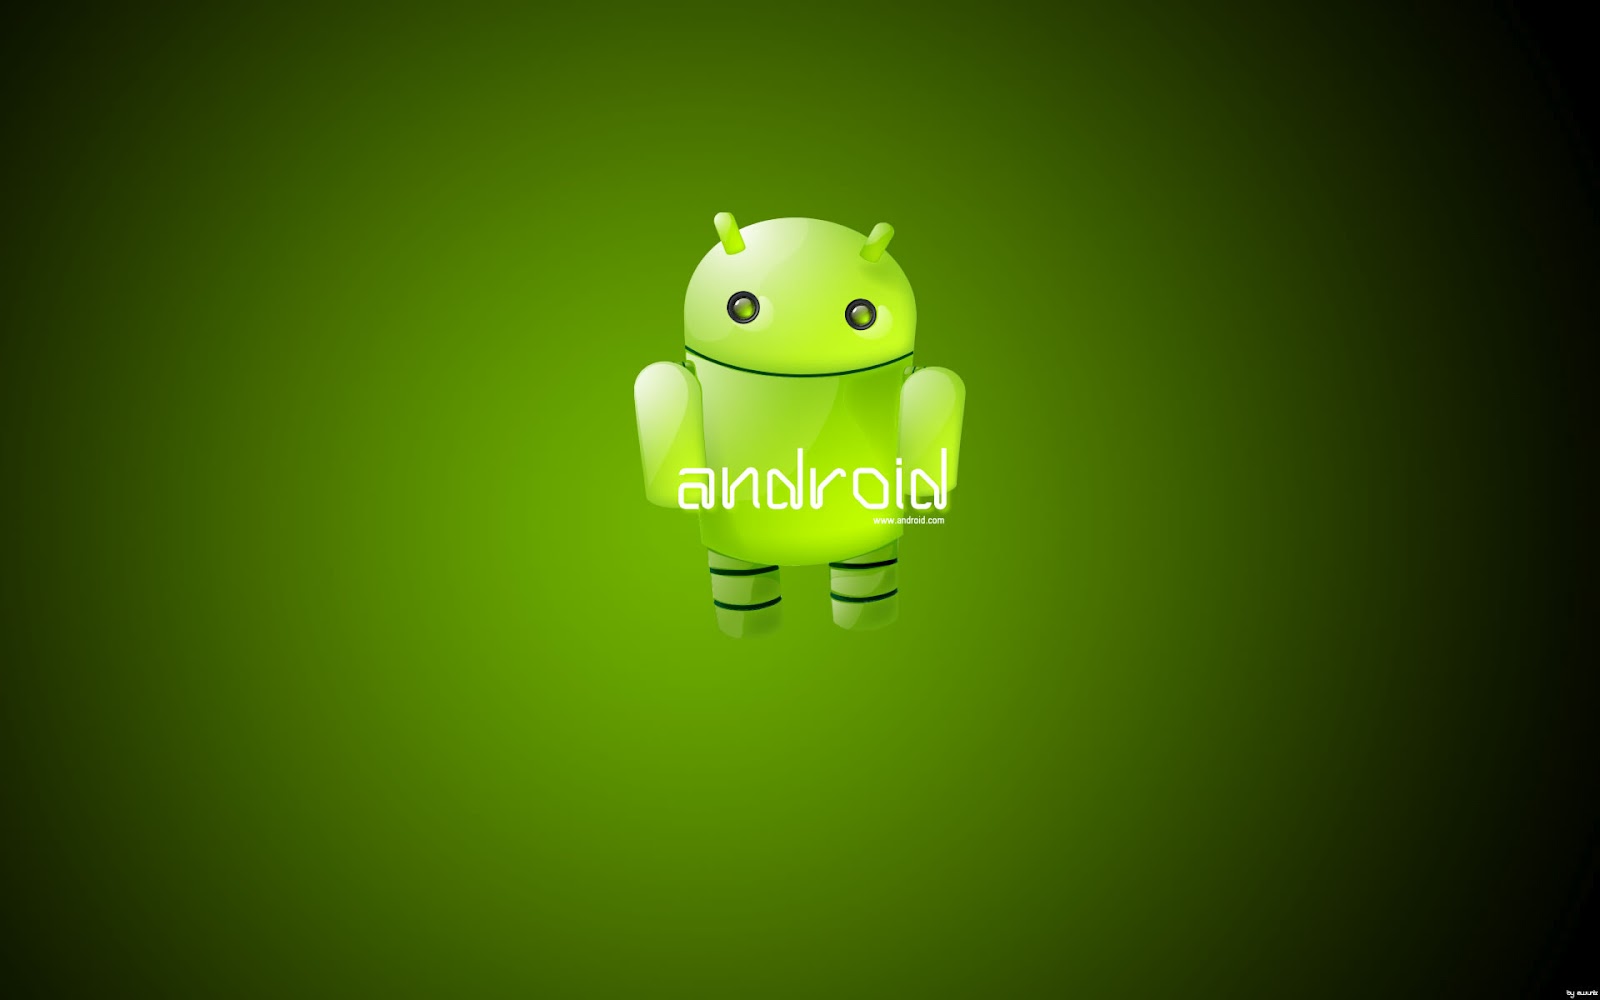 HD Wallpaper For Android Tablet